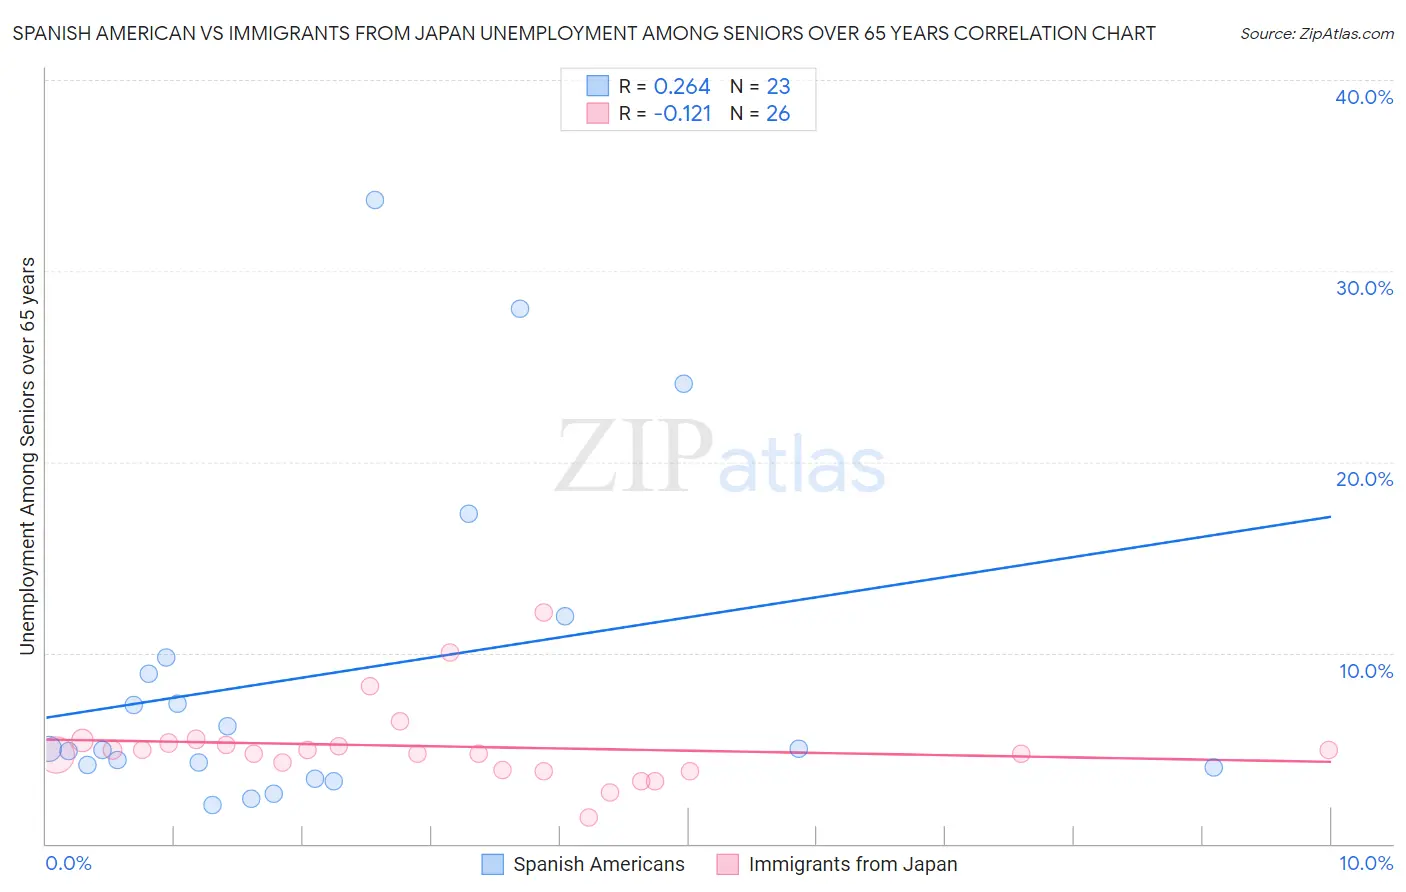 Spanish American vs Immigrants from Japan Unemployment Among Seniors over 65 years